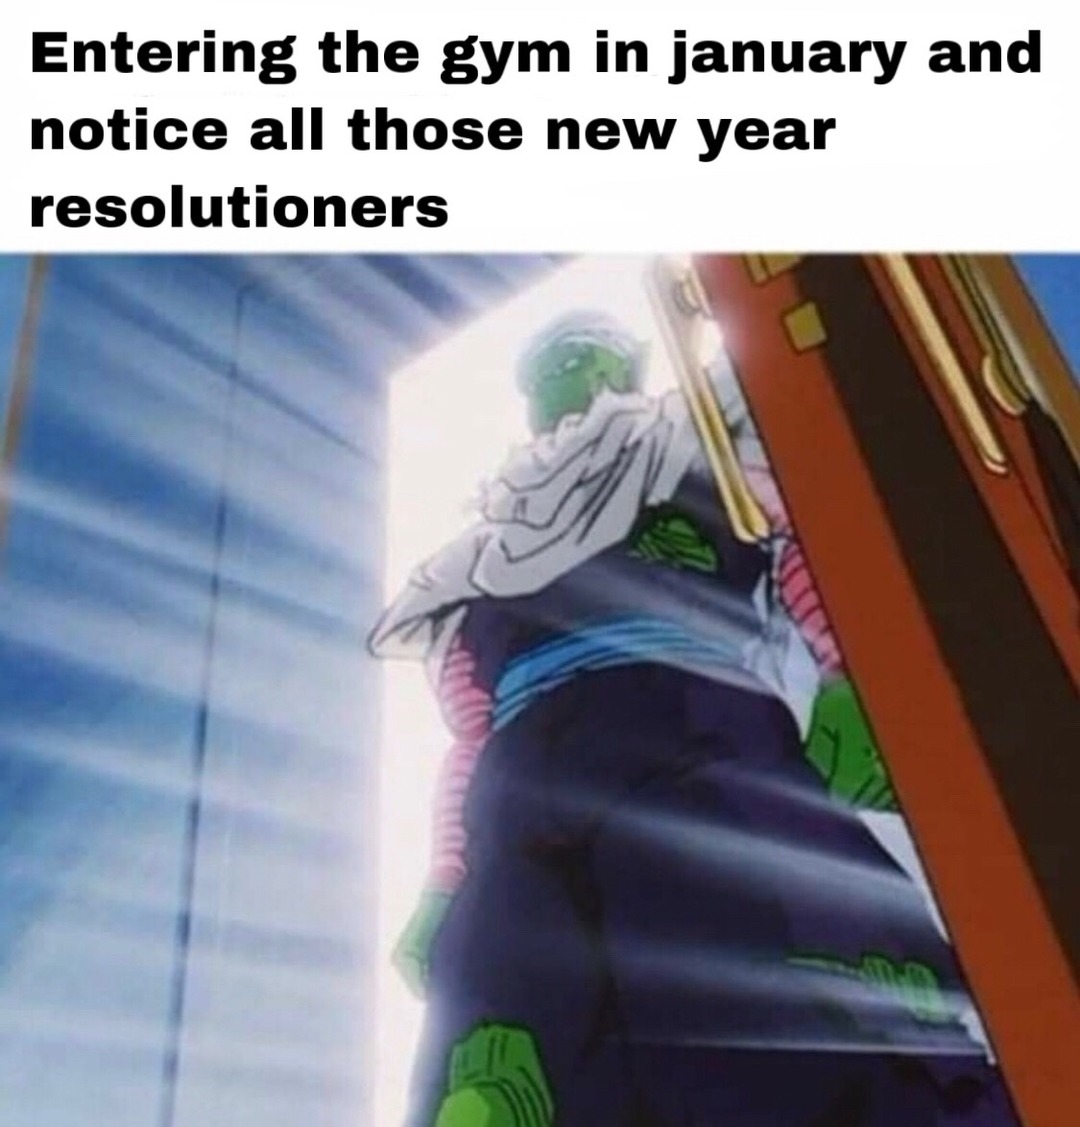 no gym in january - meme